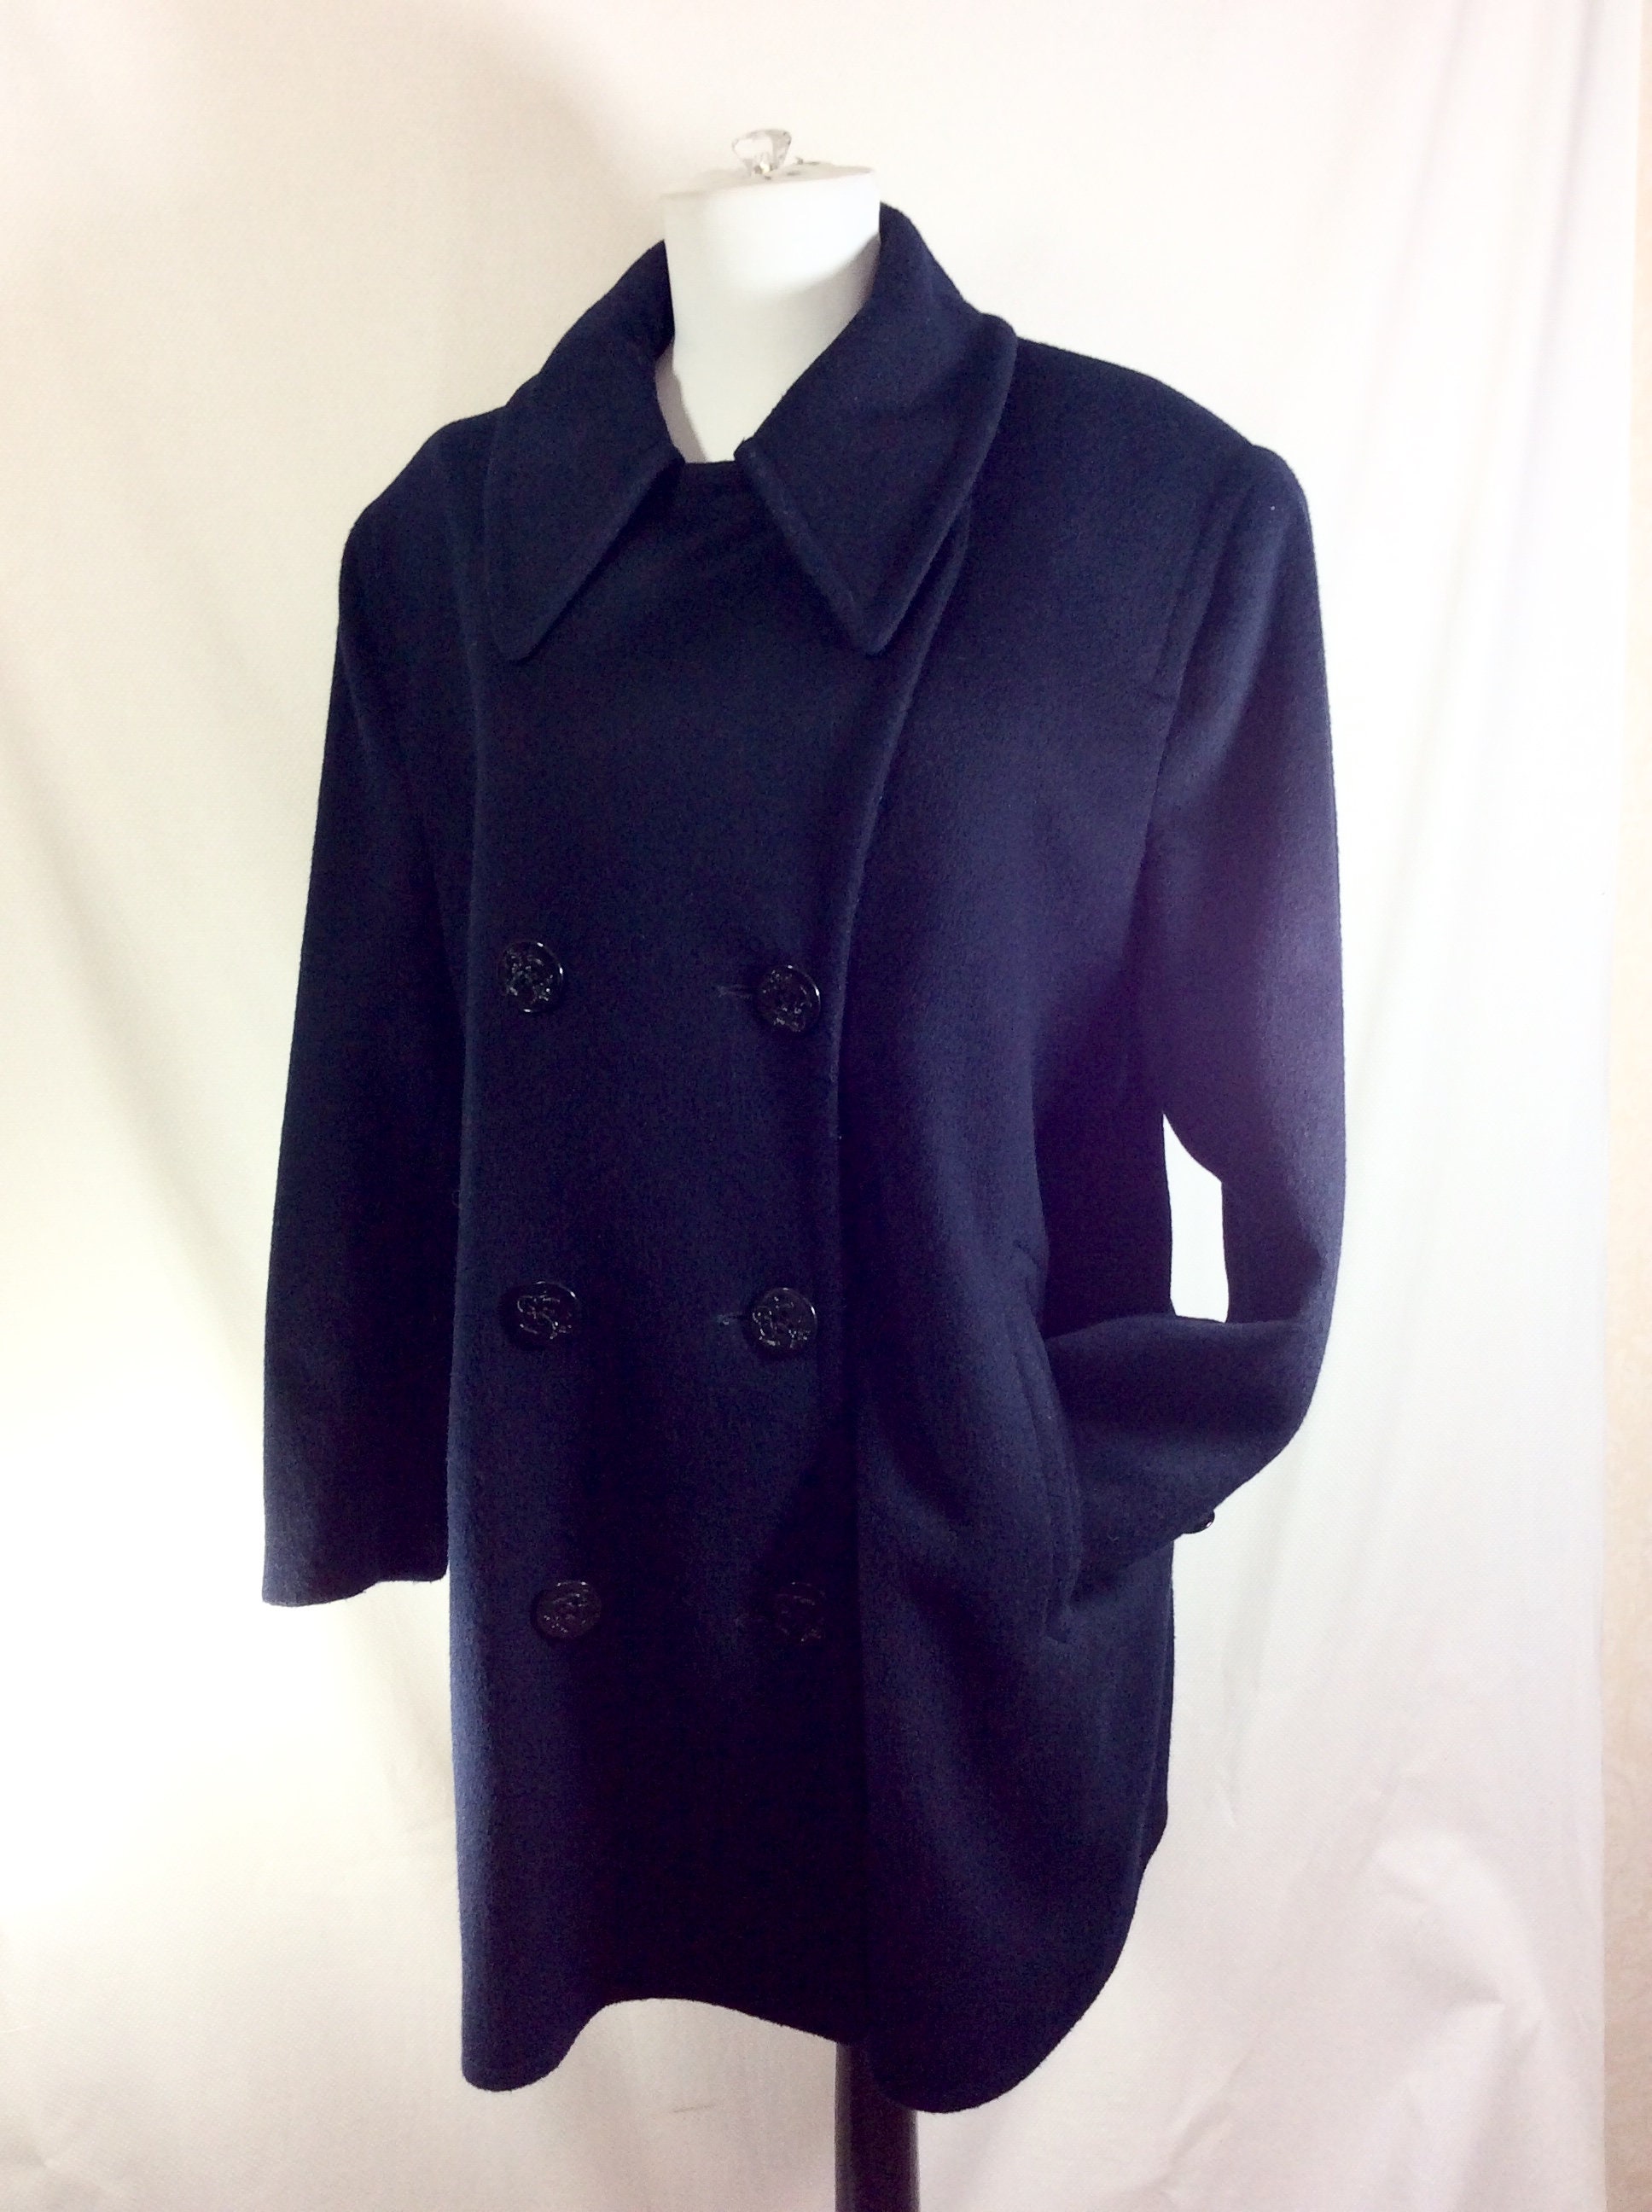 1960s Navy Blue Wool Double Breasted Peacoat with Anchor Buttons size XL